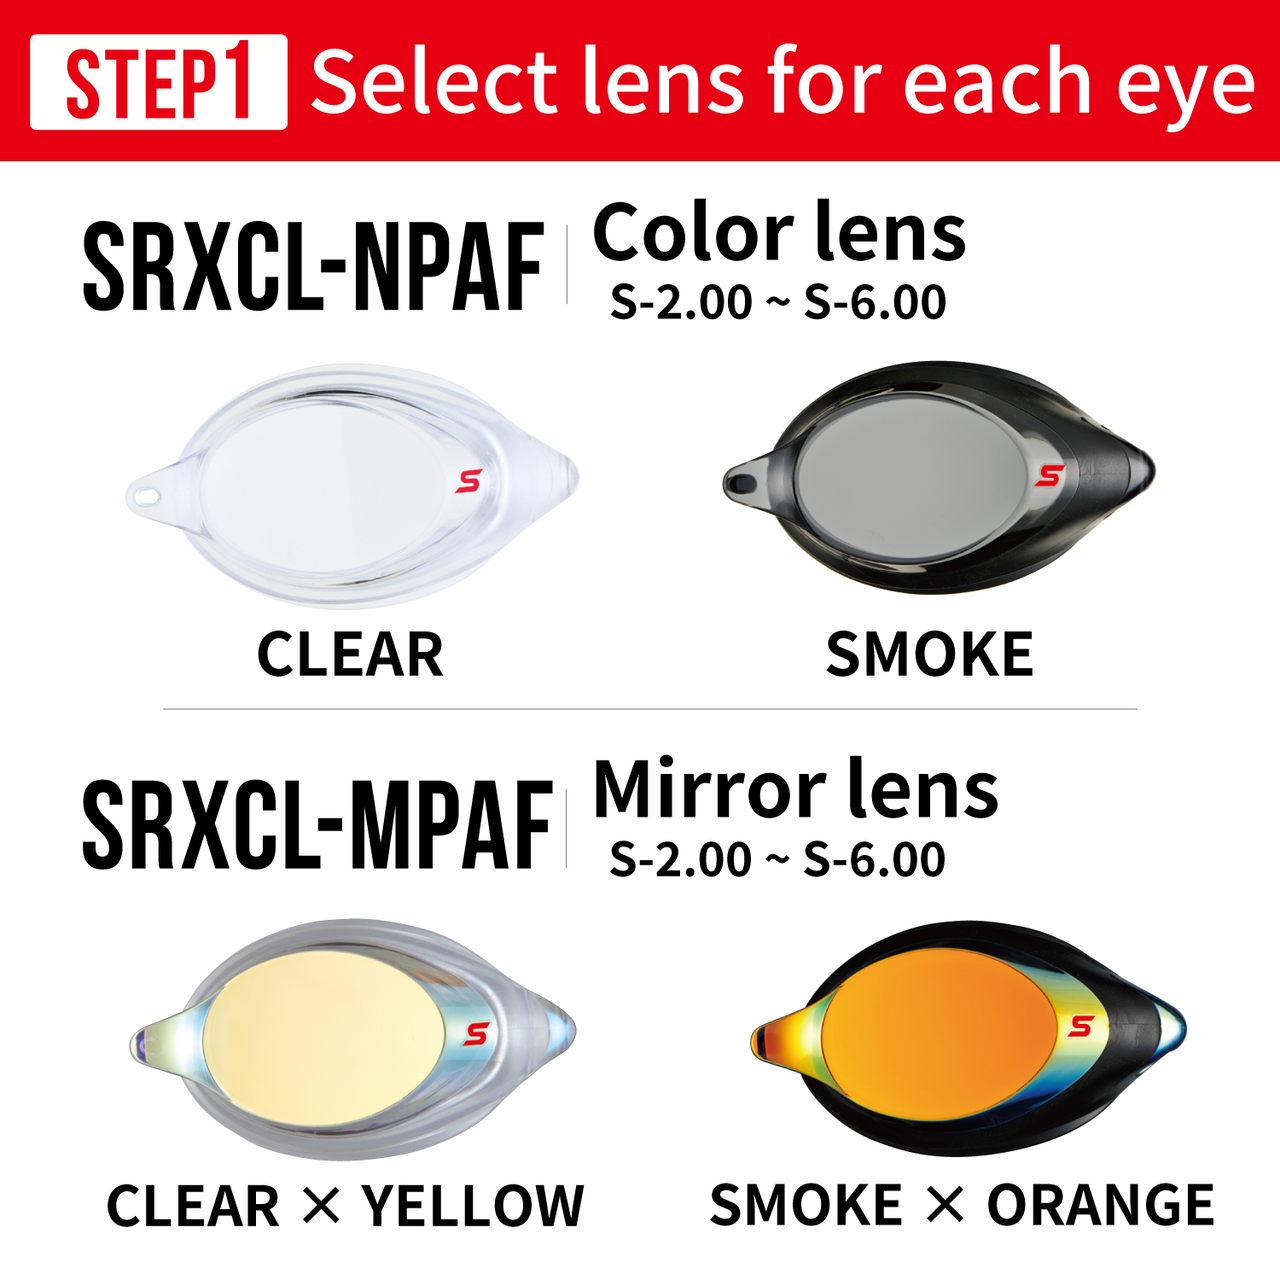 SRXCL-M PAF S-6.00 Clear x Yellow Mirror,Opt1, large image number 1